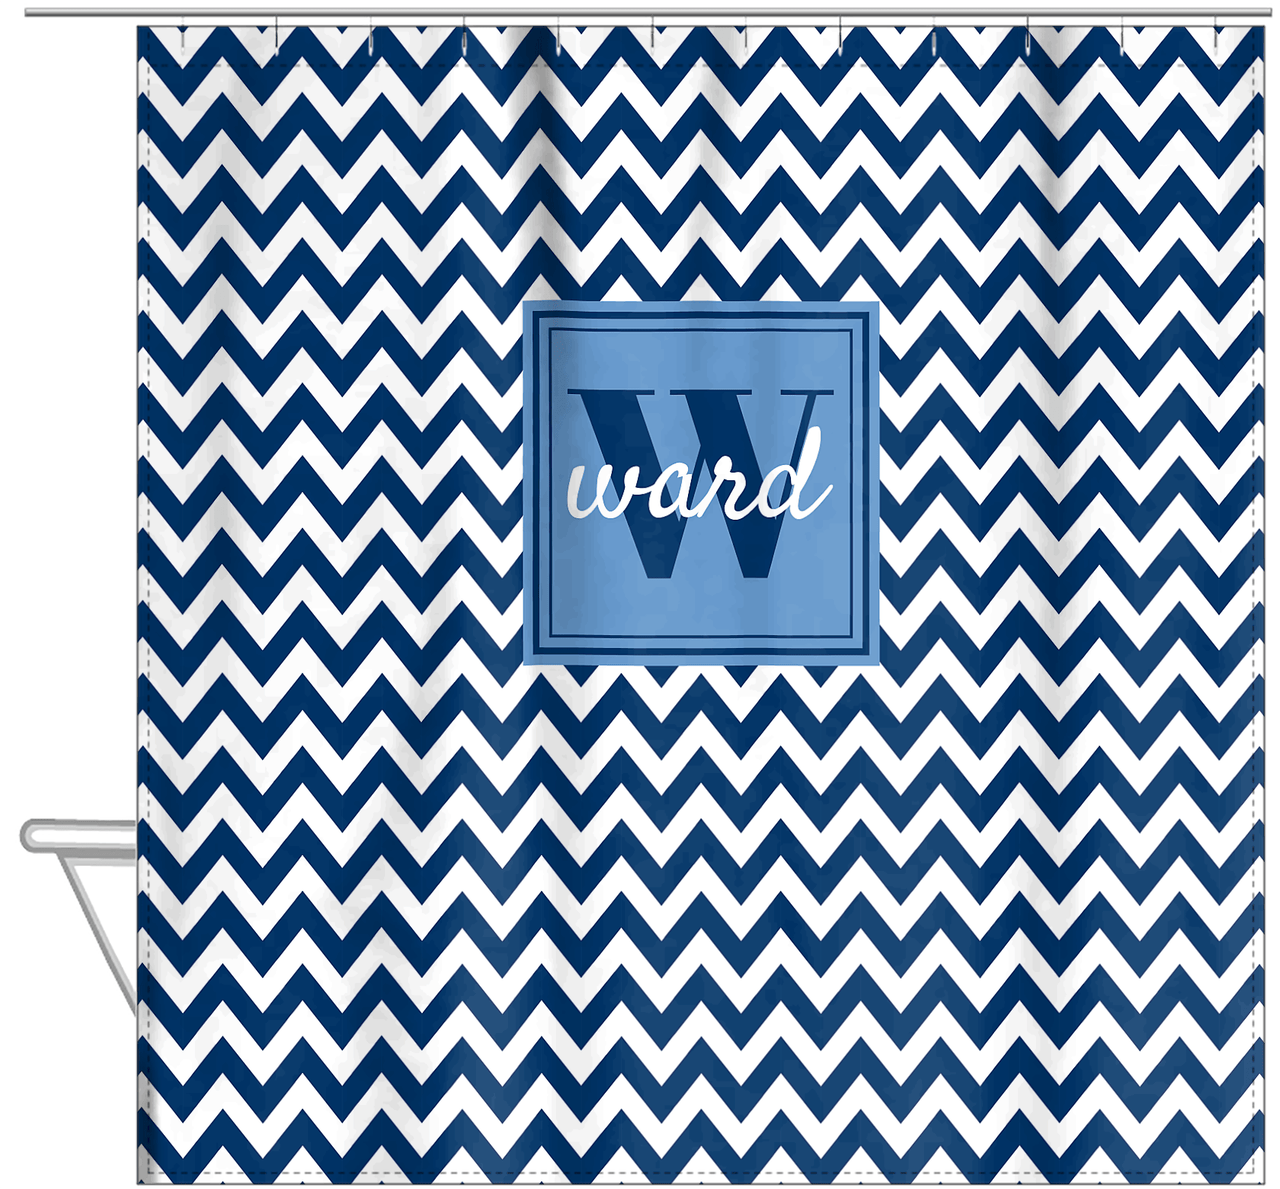 Personalized Chevron Shower Curtain II - Blue and White - Square Nameplate - Hanging View